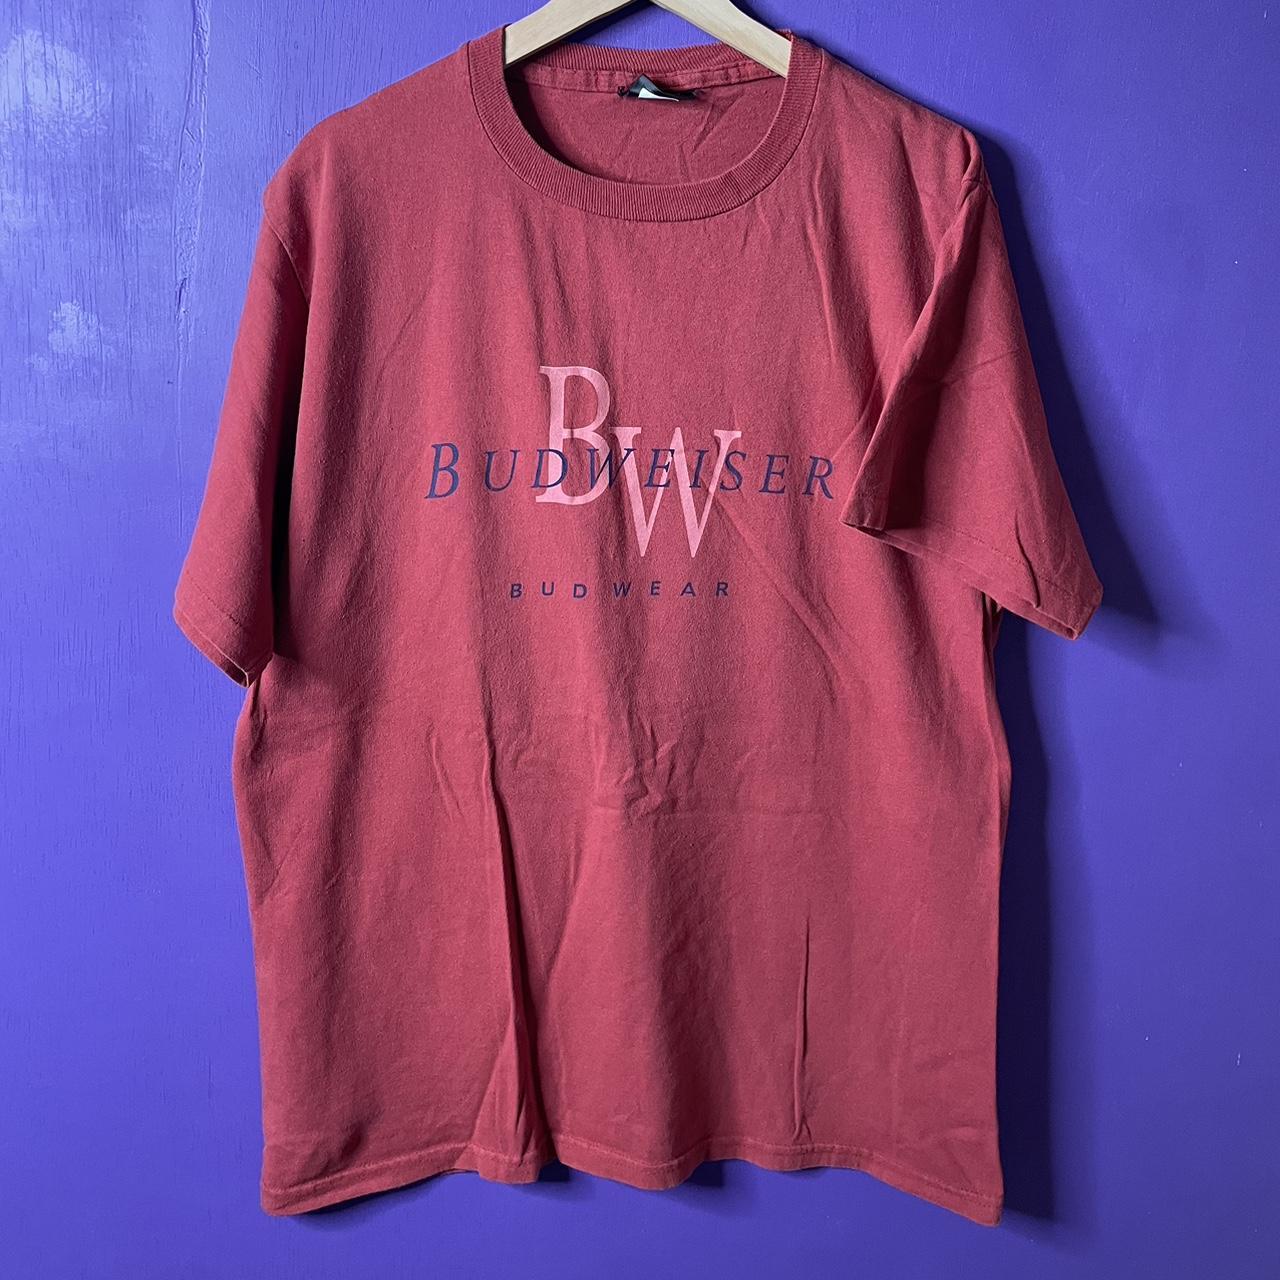 Vintage 90s Budweiser budwear 6 pack t-shirt. Is in...